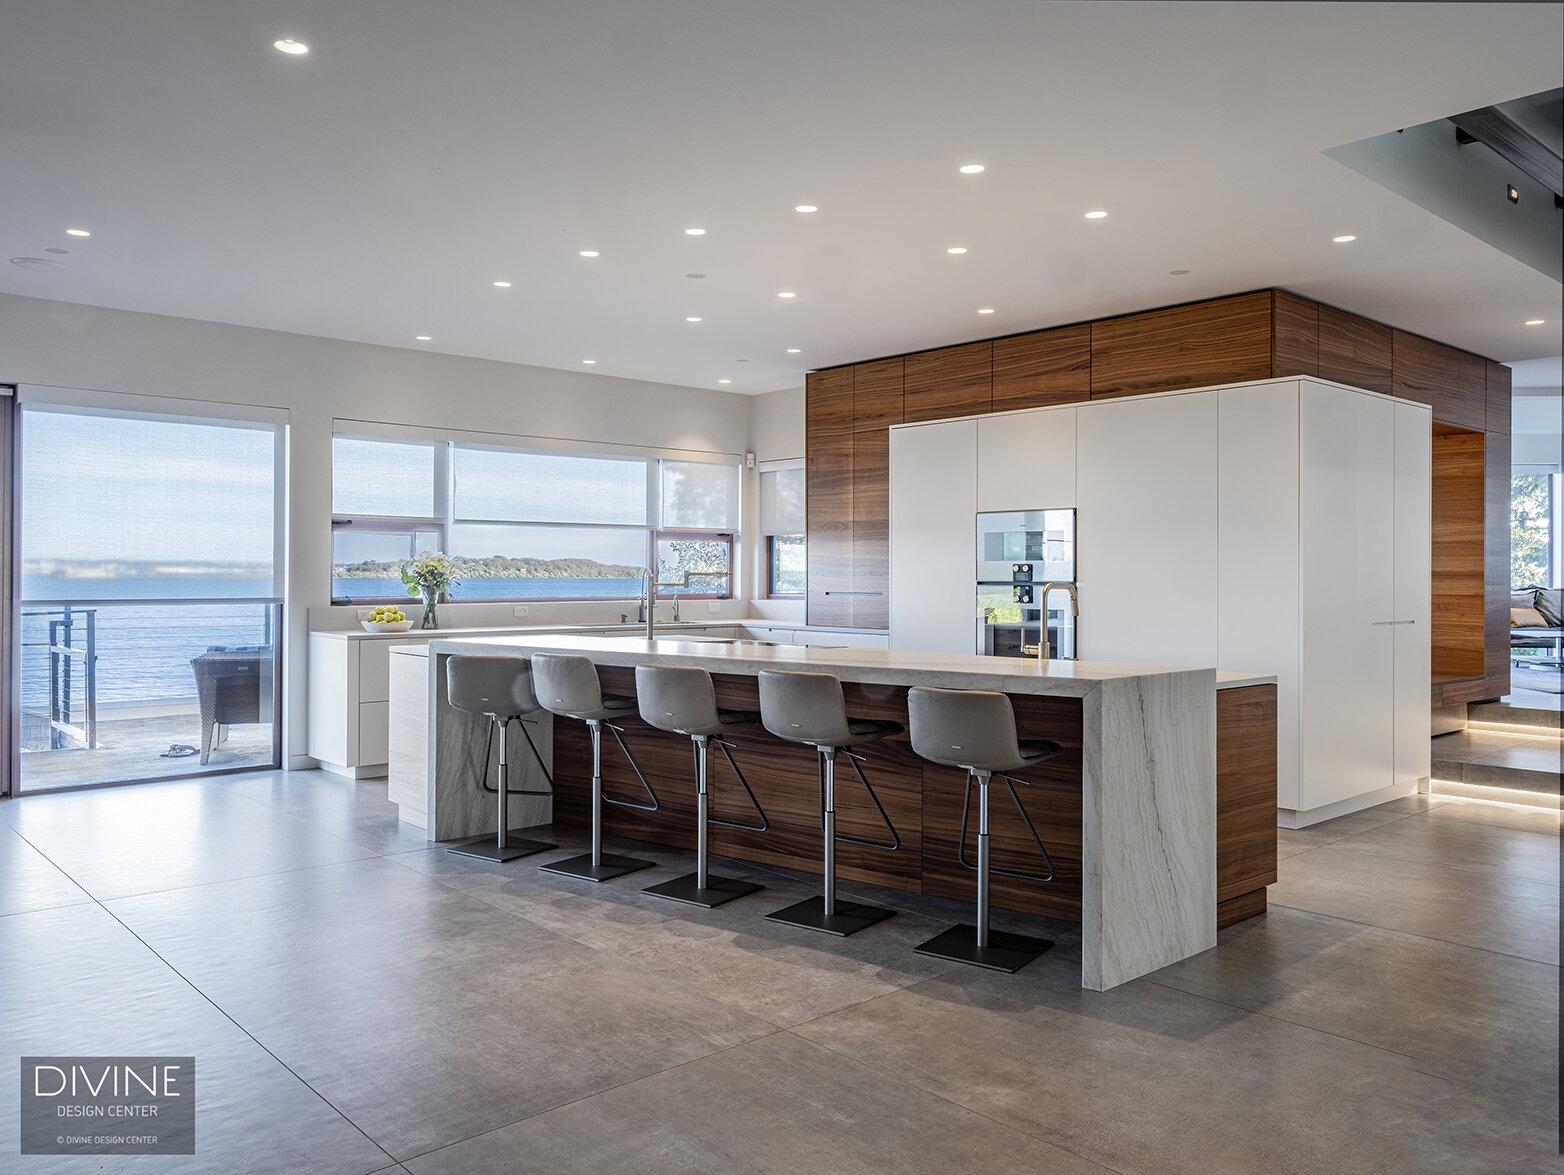  Modern, Leicht kitchen with an extra-large, waterfall kitchen island sitting five. A Calcutta marble island top pairs with a walnut toe kick and walnut accents throughout the space. High gloss, white paneled kitchen cabinets hide the refrigerator an